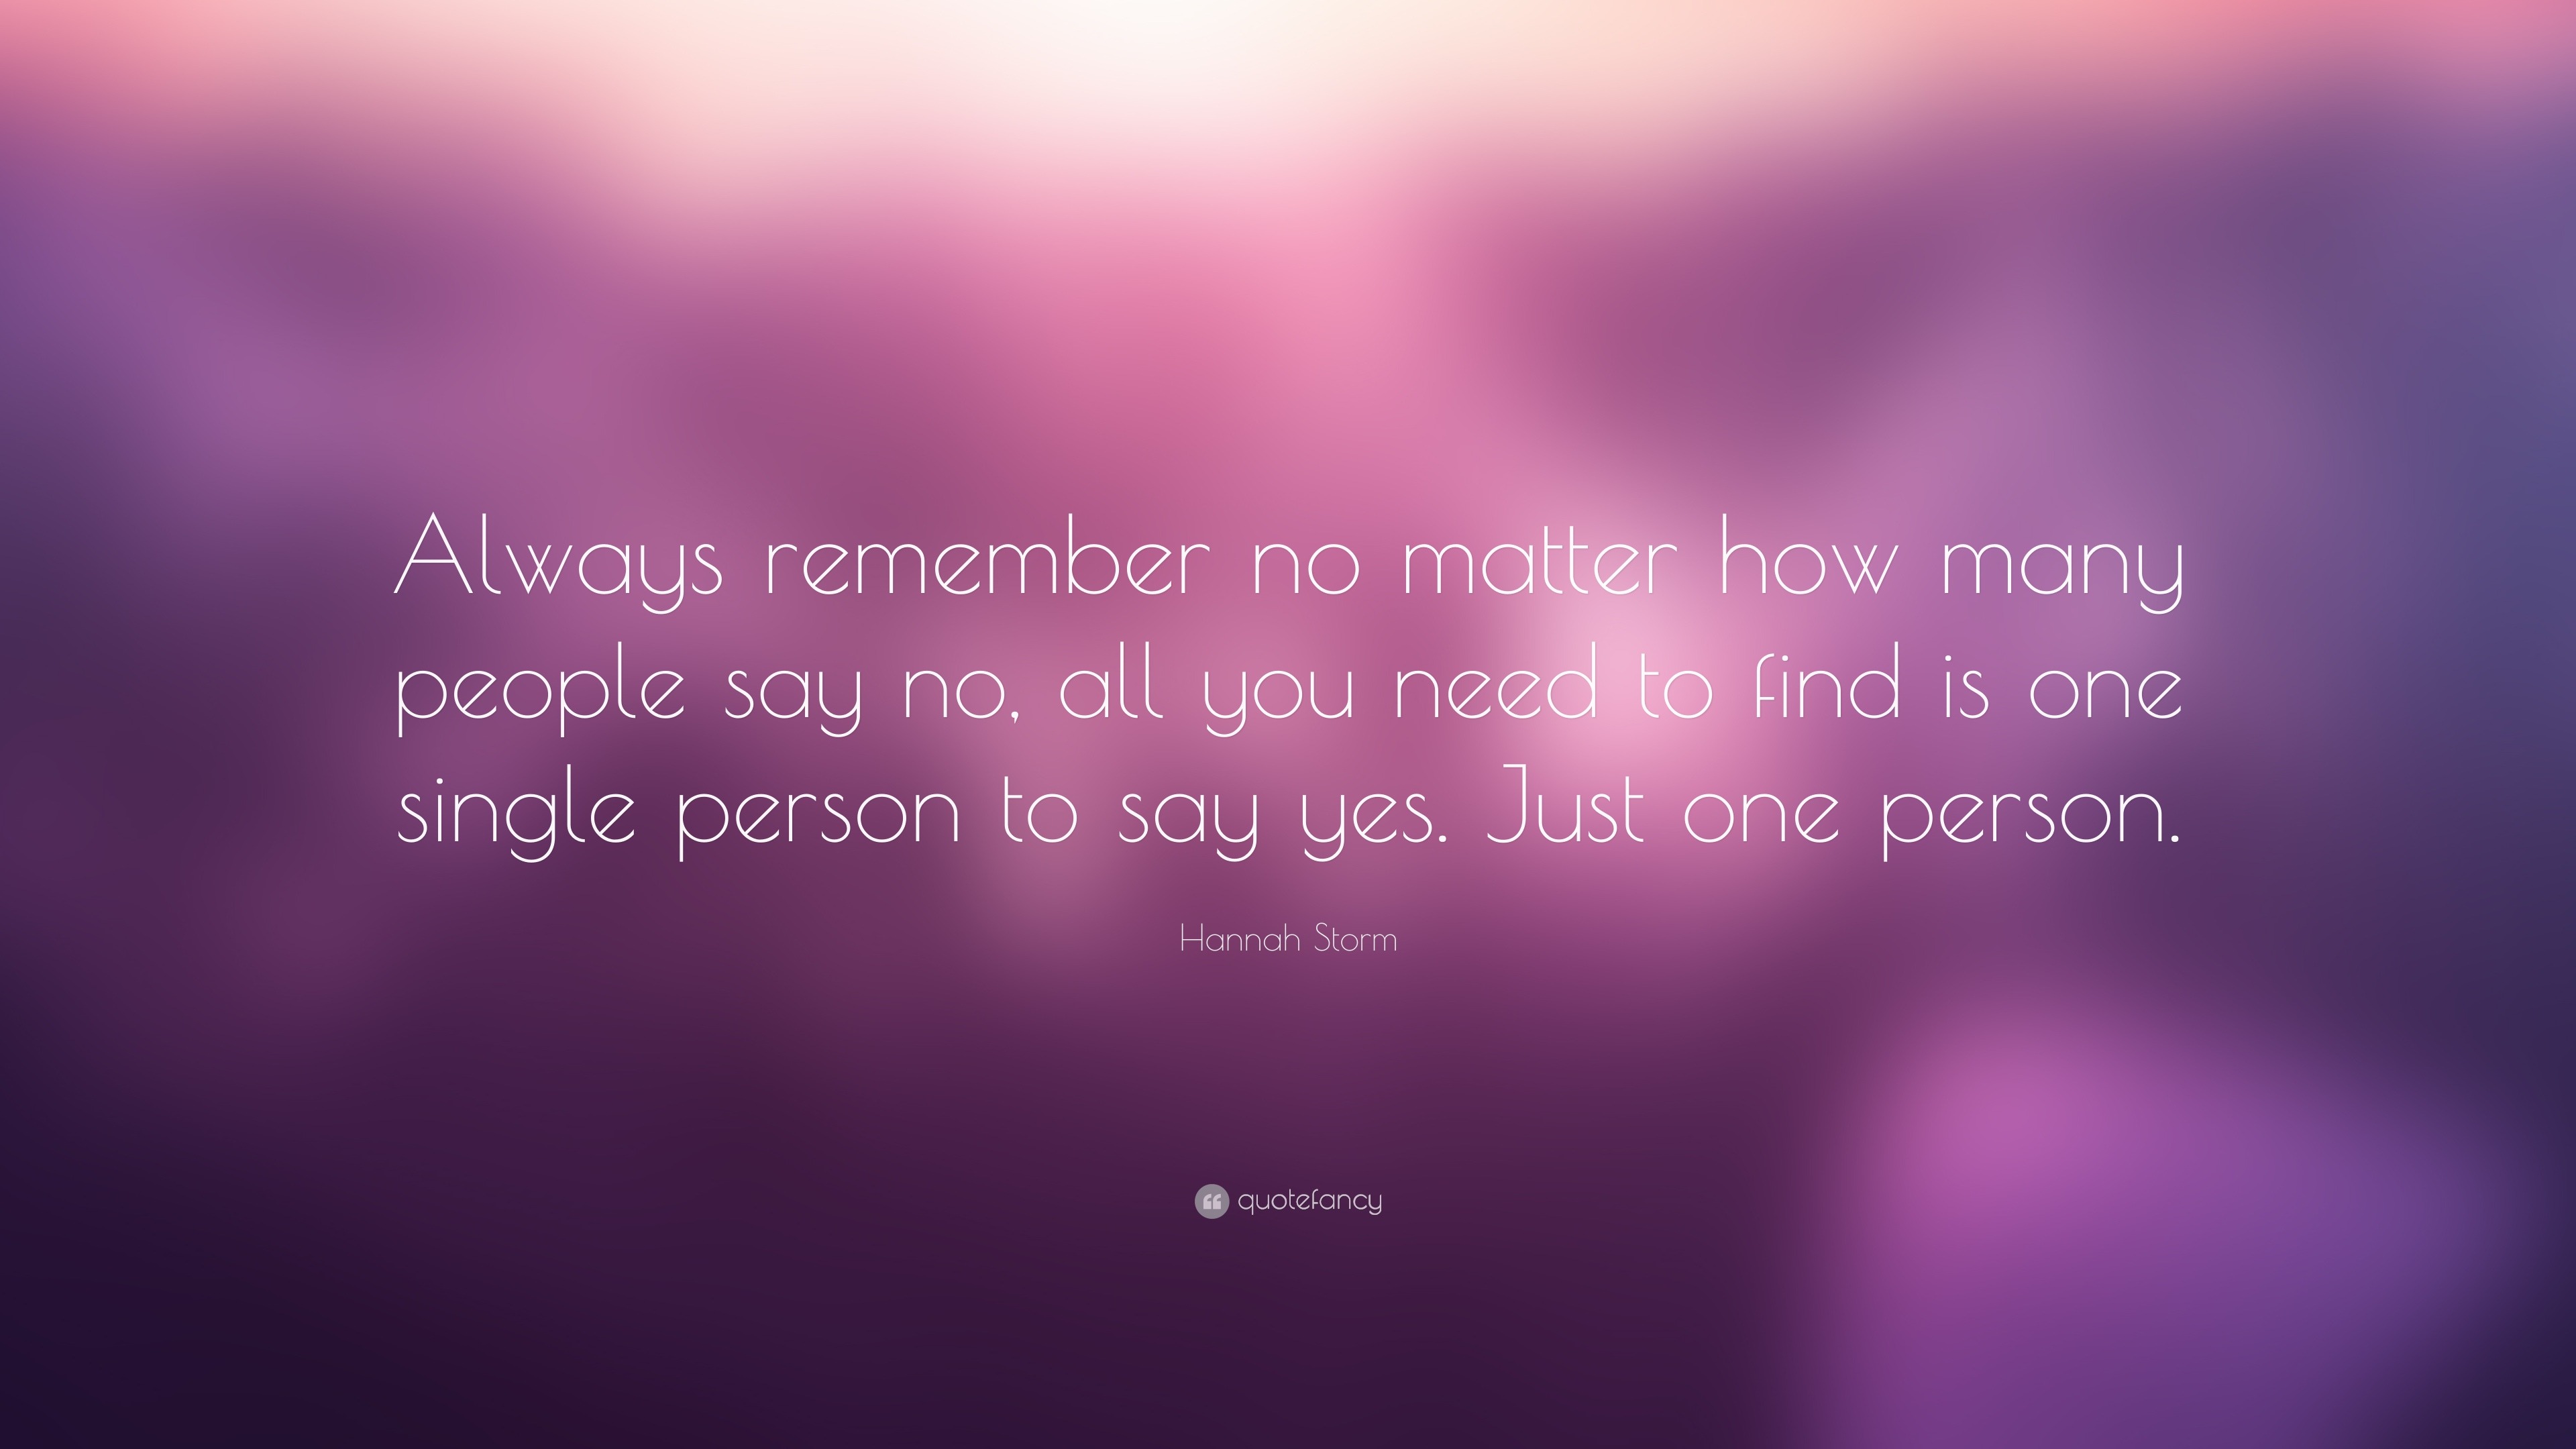 Hannah Storm Quote: “Always remember no matter how many people say no ...